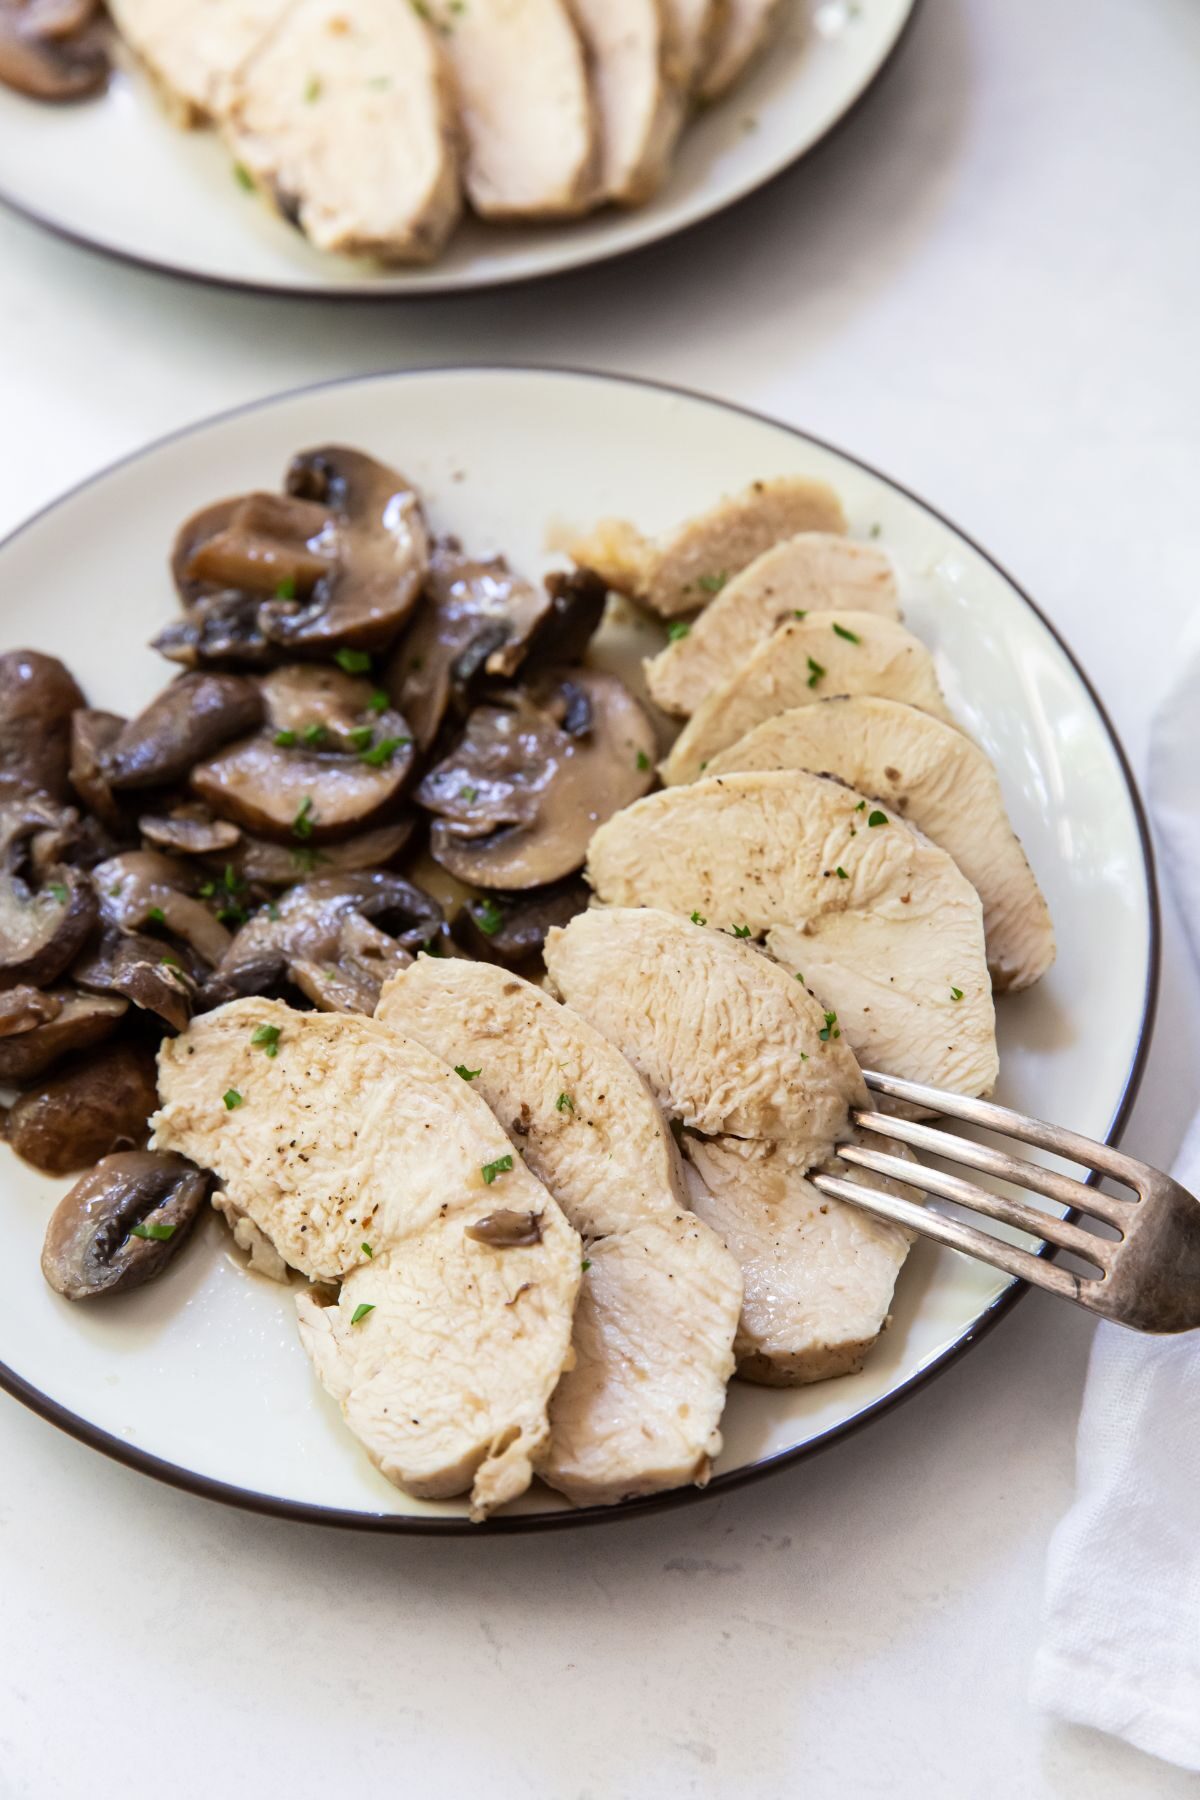 white plate with chicken and mushrooms fork on plate white napkin on the side